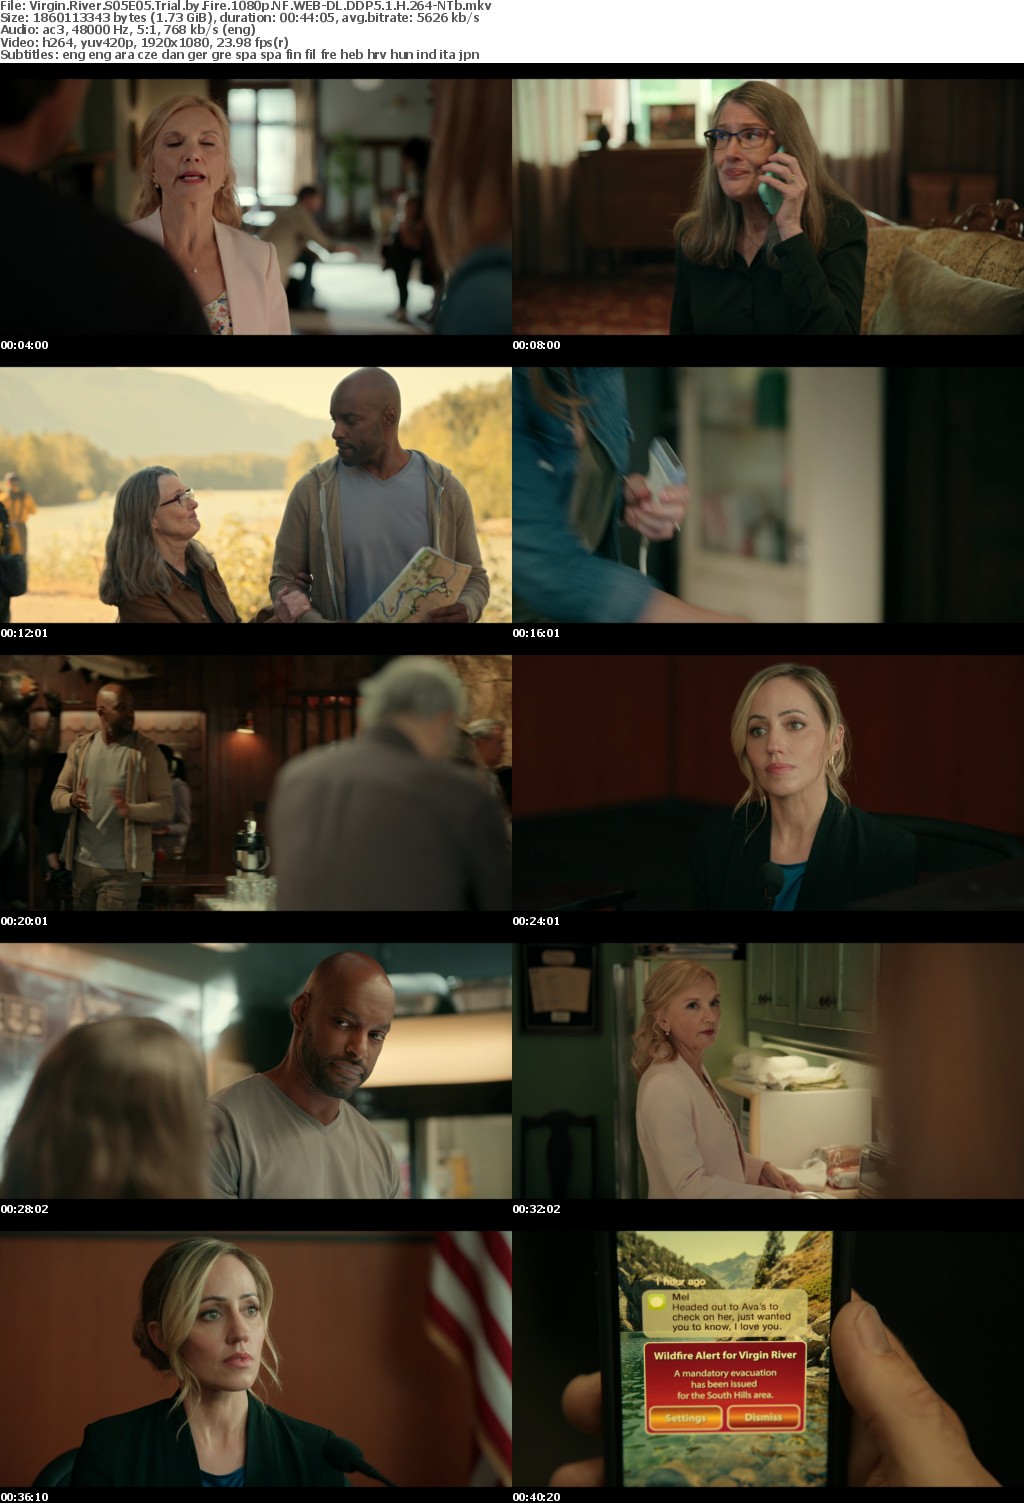 Virgin River S05E05 Trial by Fire 1080p NF WEB-DL DDP5 1 H 264-NTb